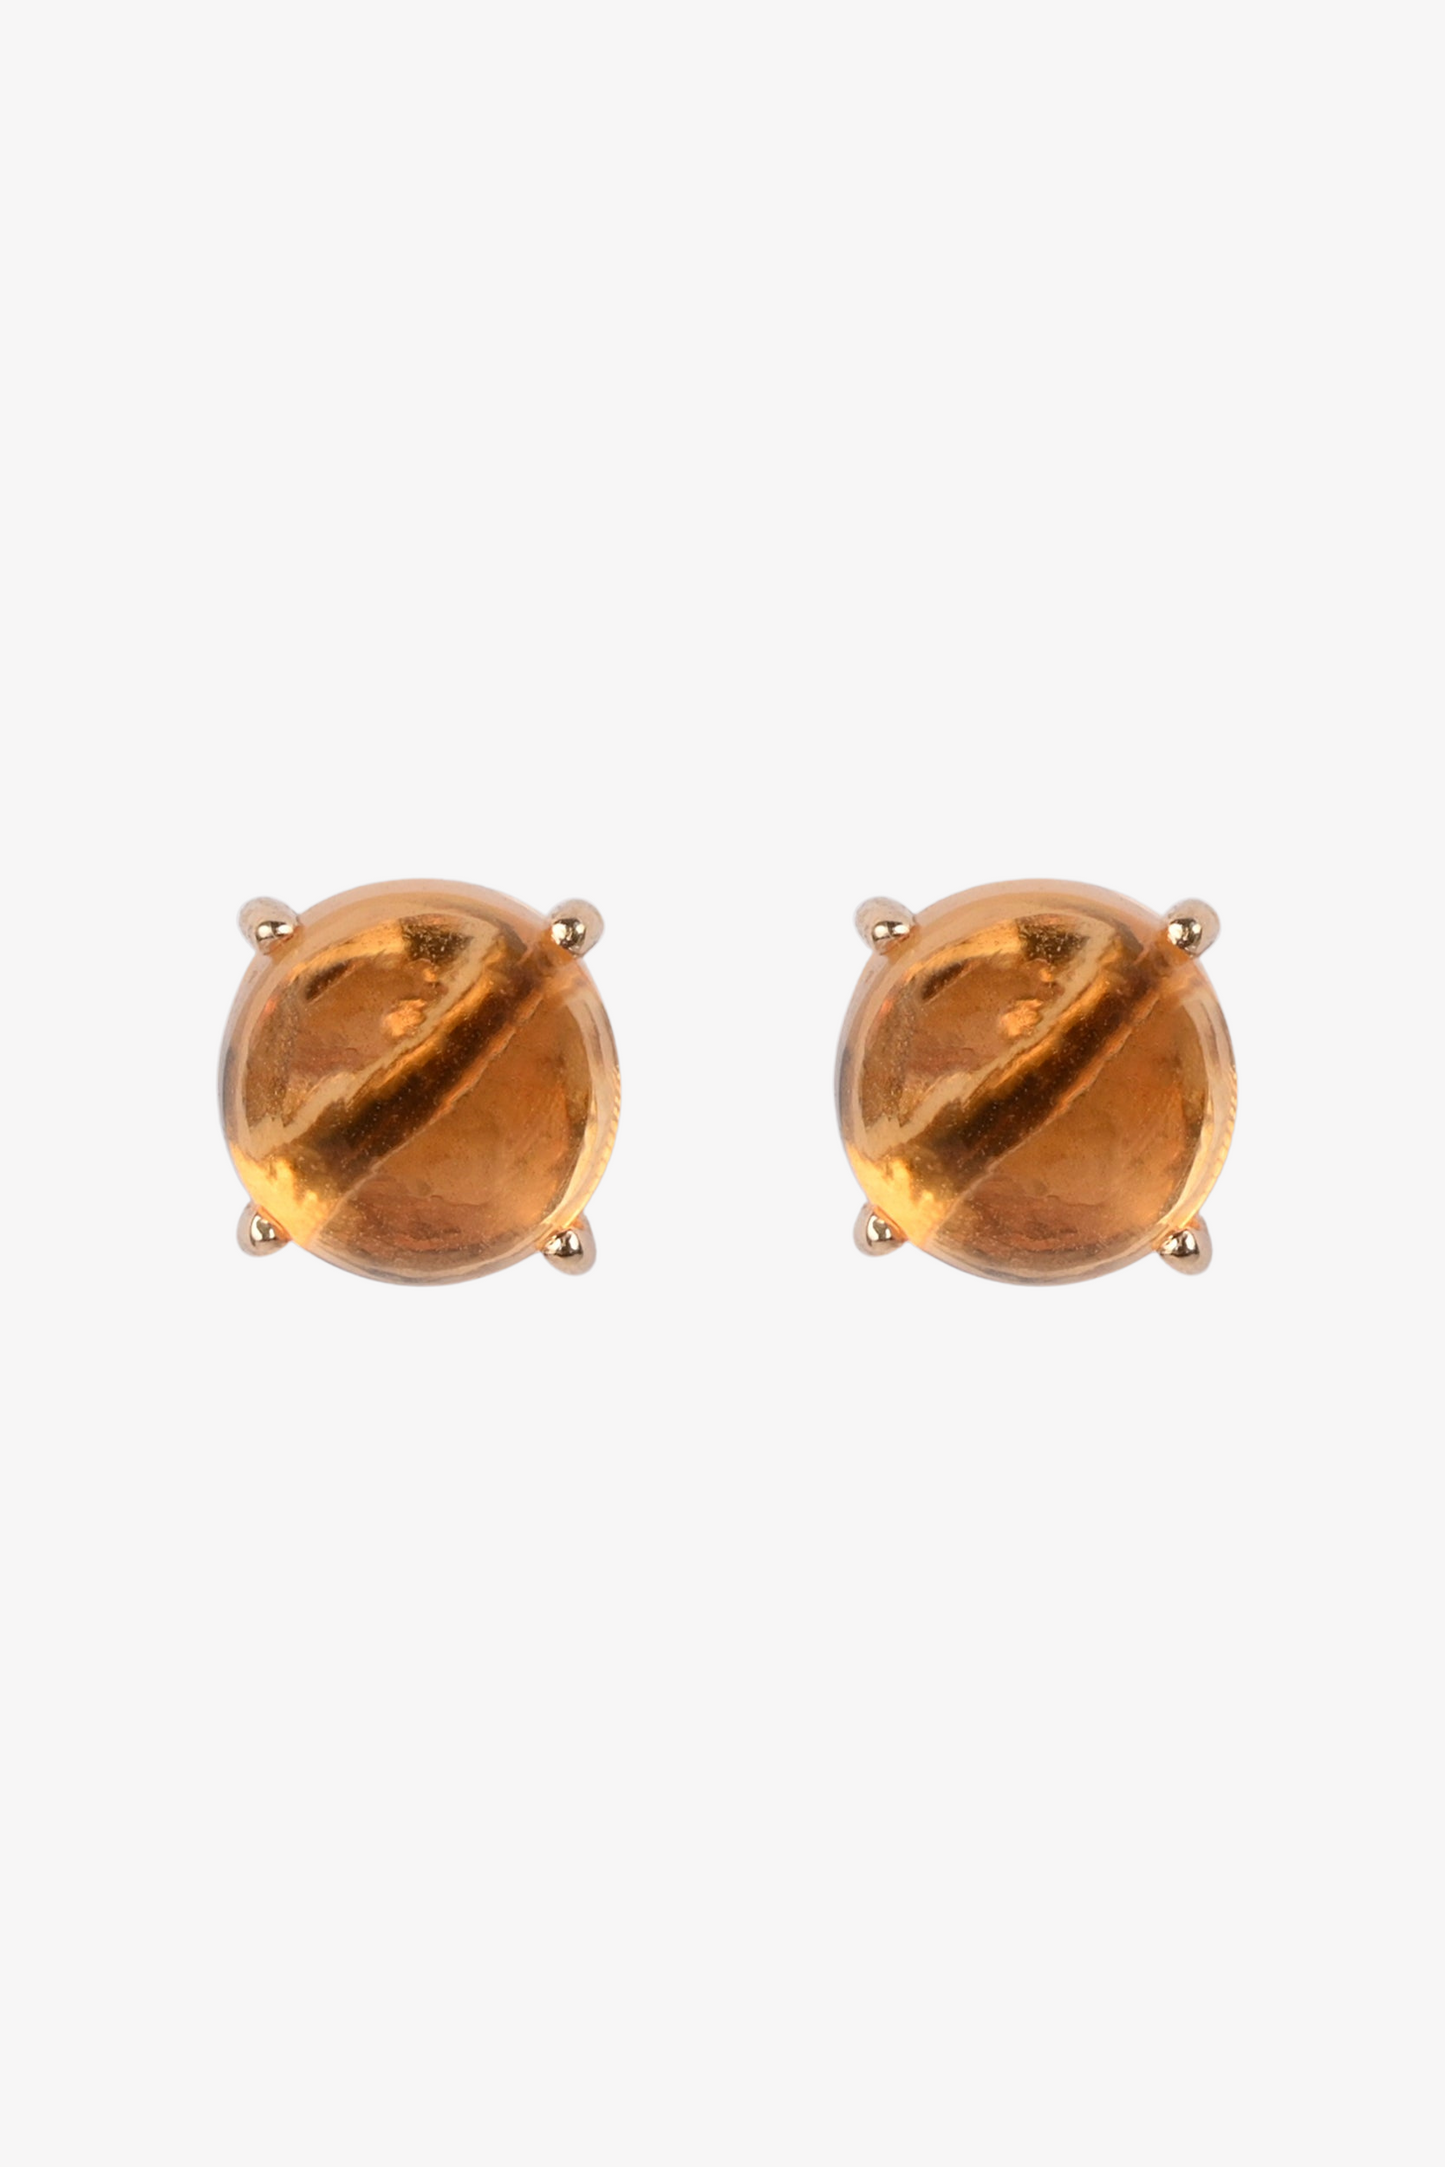 Discover 133+ amber stone earrings latest